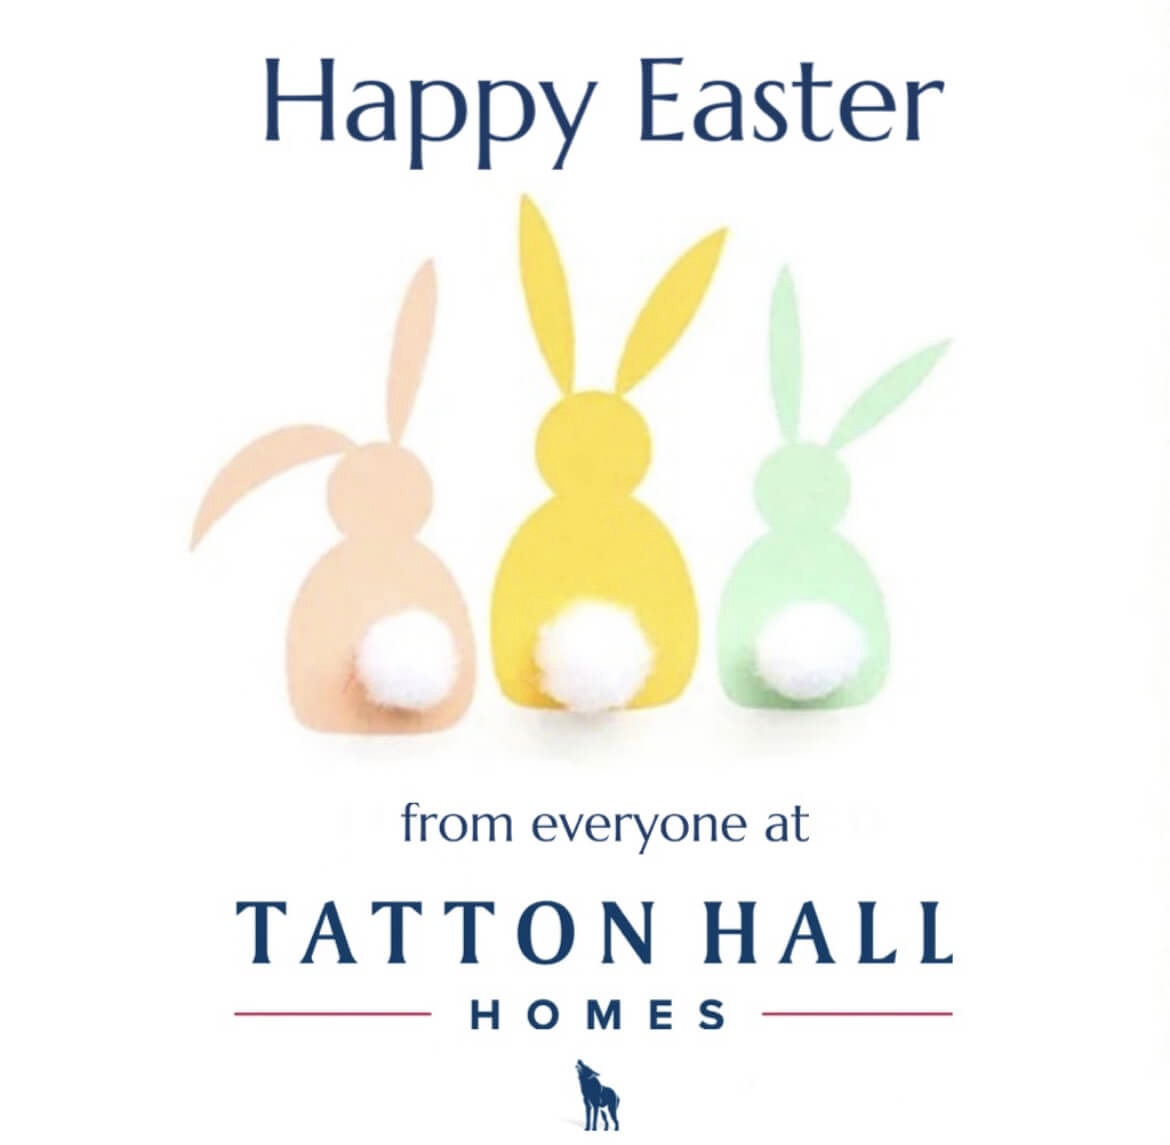 Wishing you a very Happy Easter 